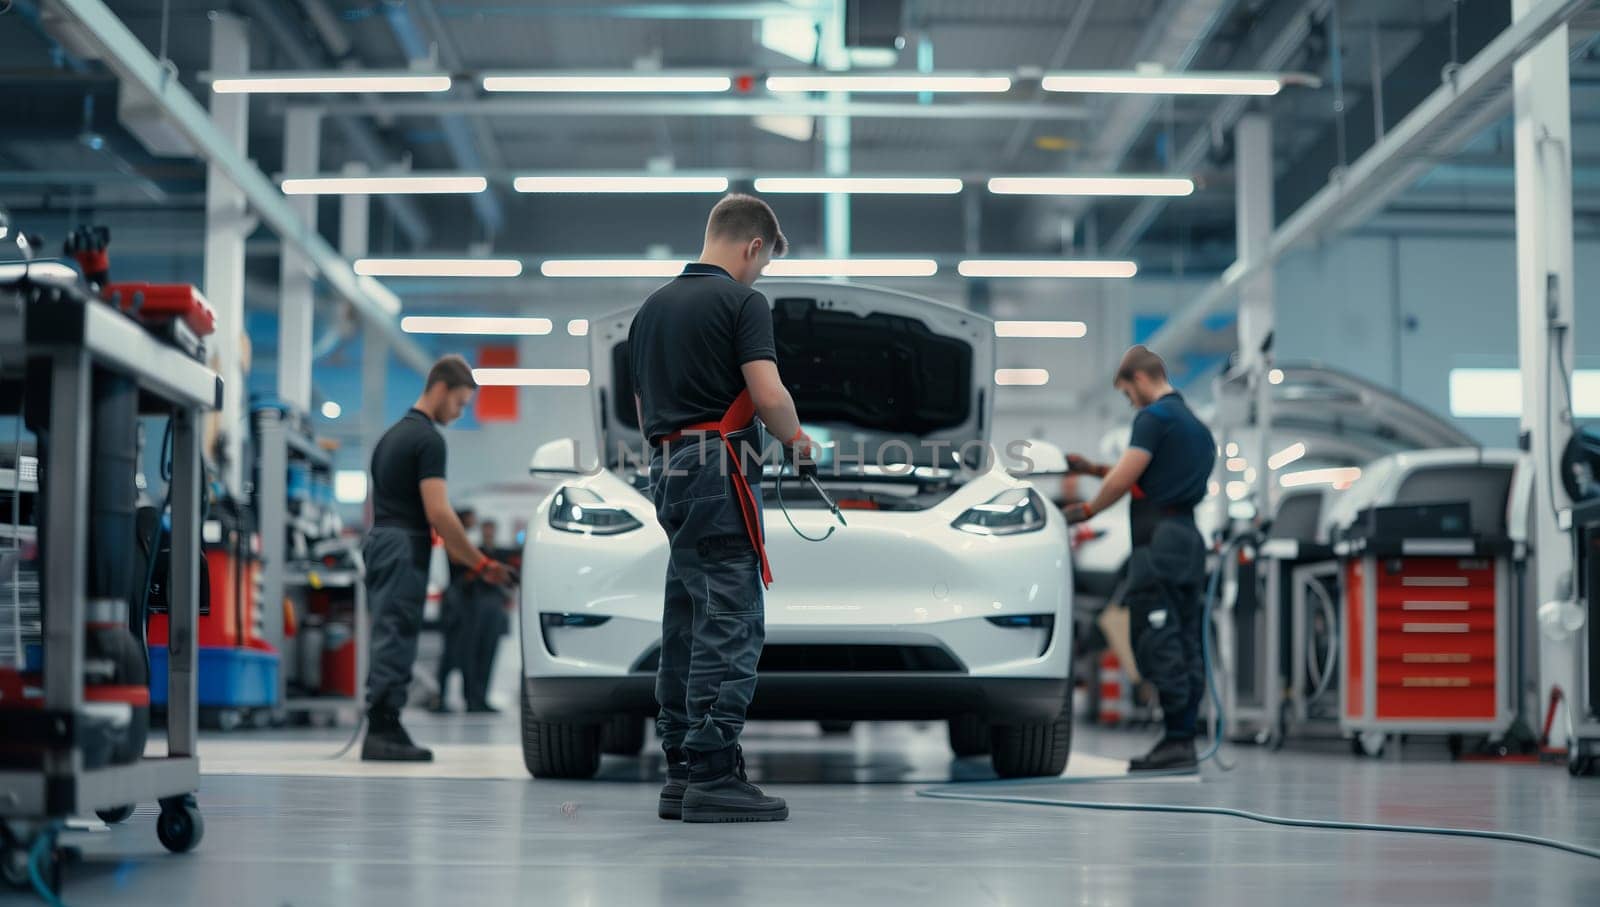 A team of workers are assembling a Tesla Model 3 at a factory, focusing on tires, wheels, automotive design, bumpers, lighting, and ensuring the vehicle is ready for the road